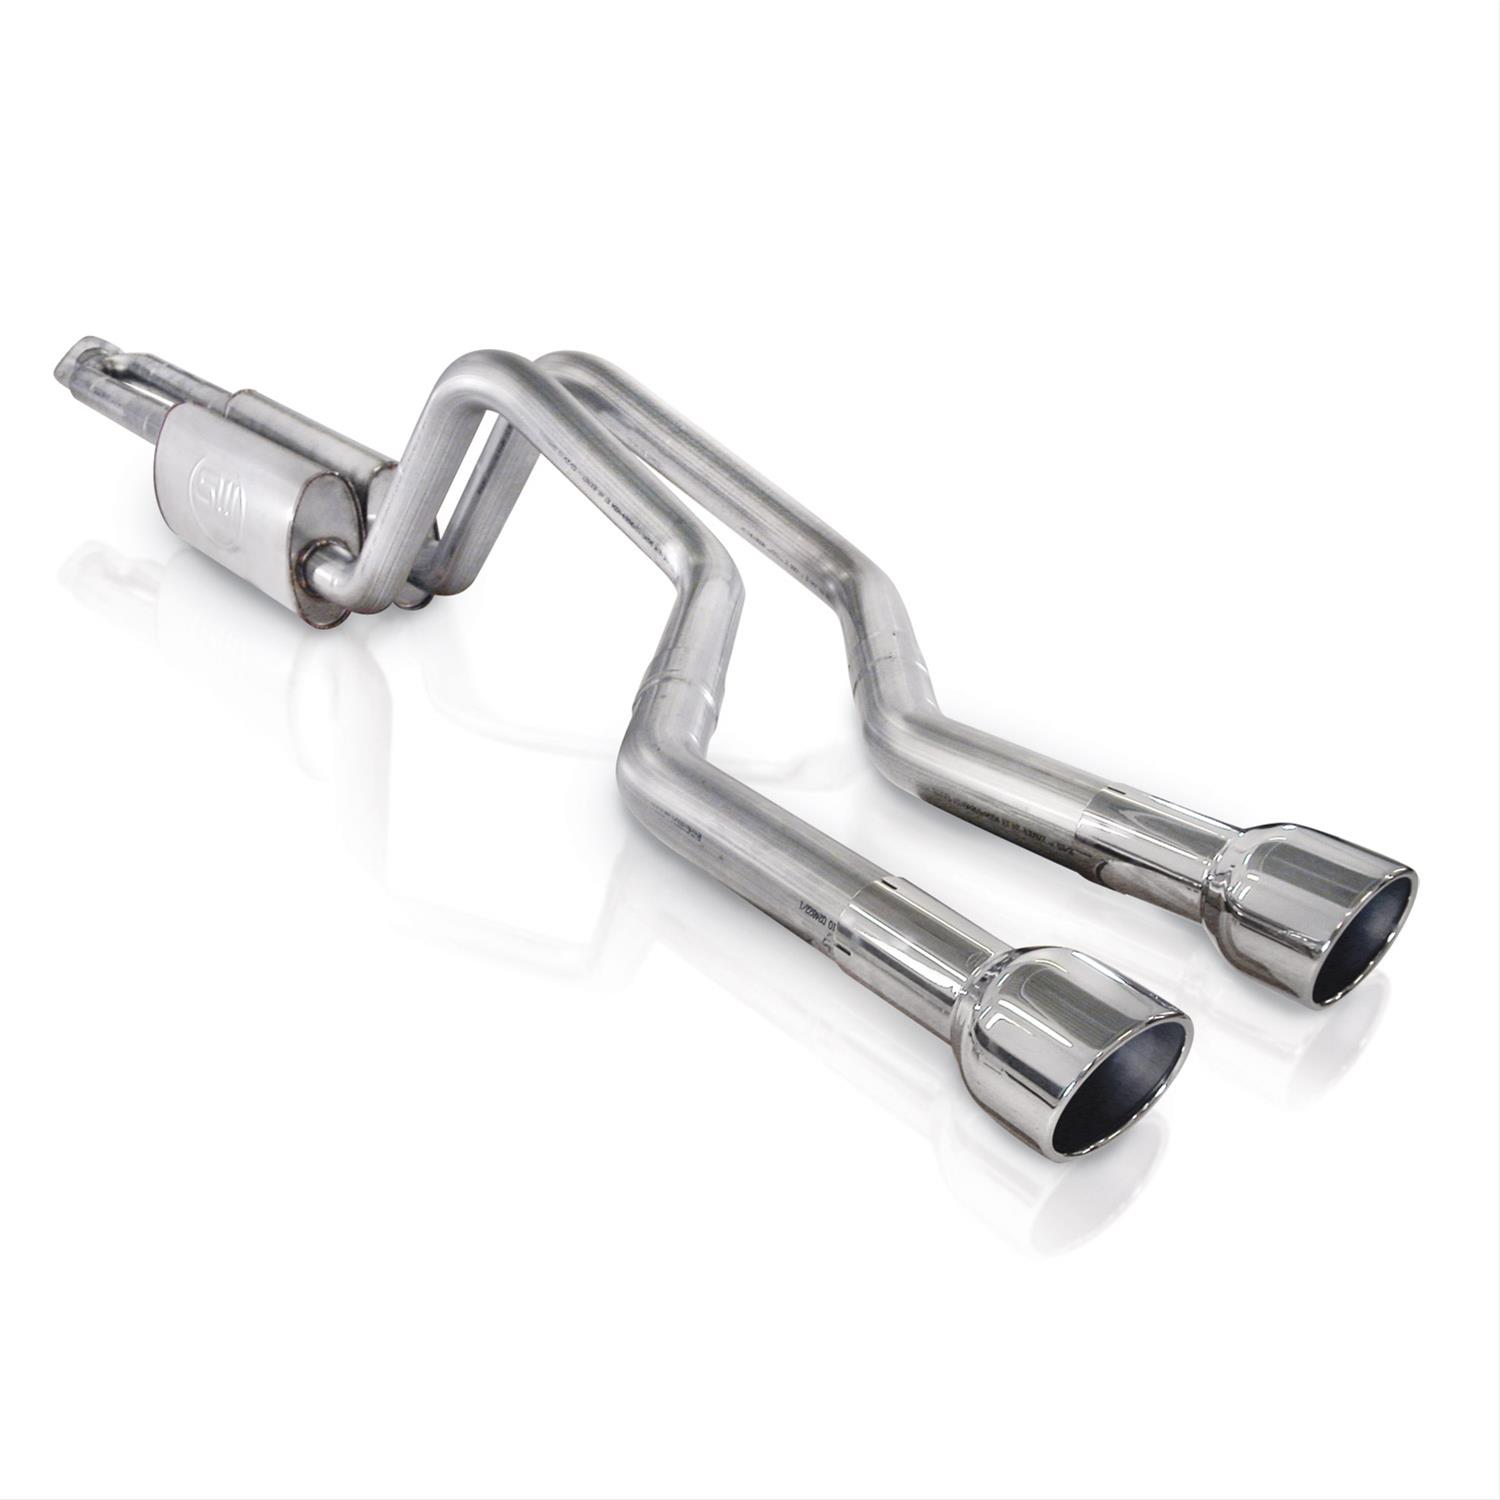 Stainless Works TH3W Stainless Works Trick Exhaust Hangers | Summit Racing